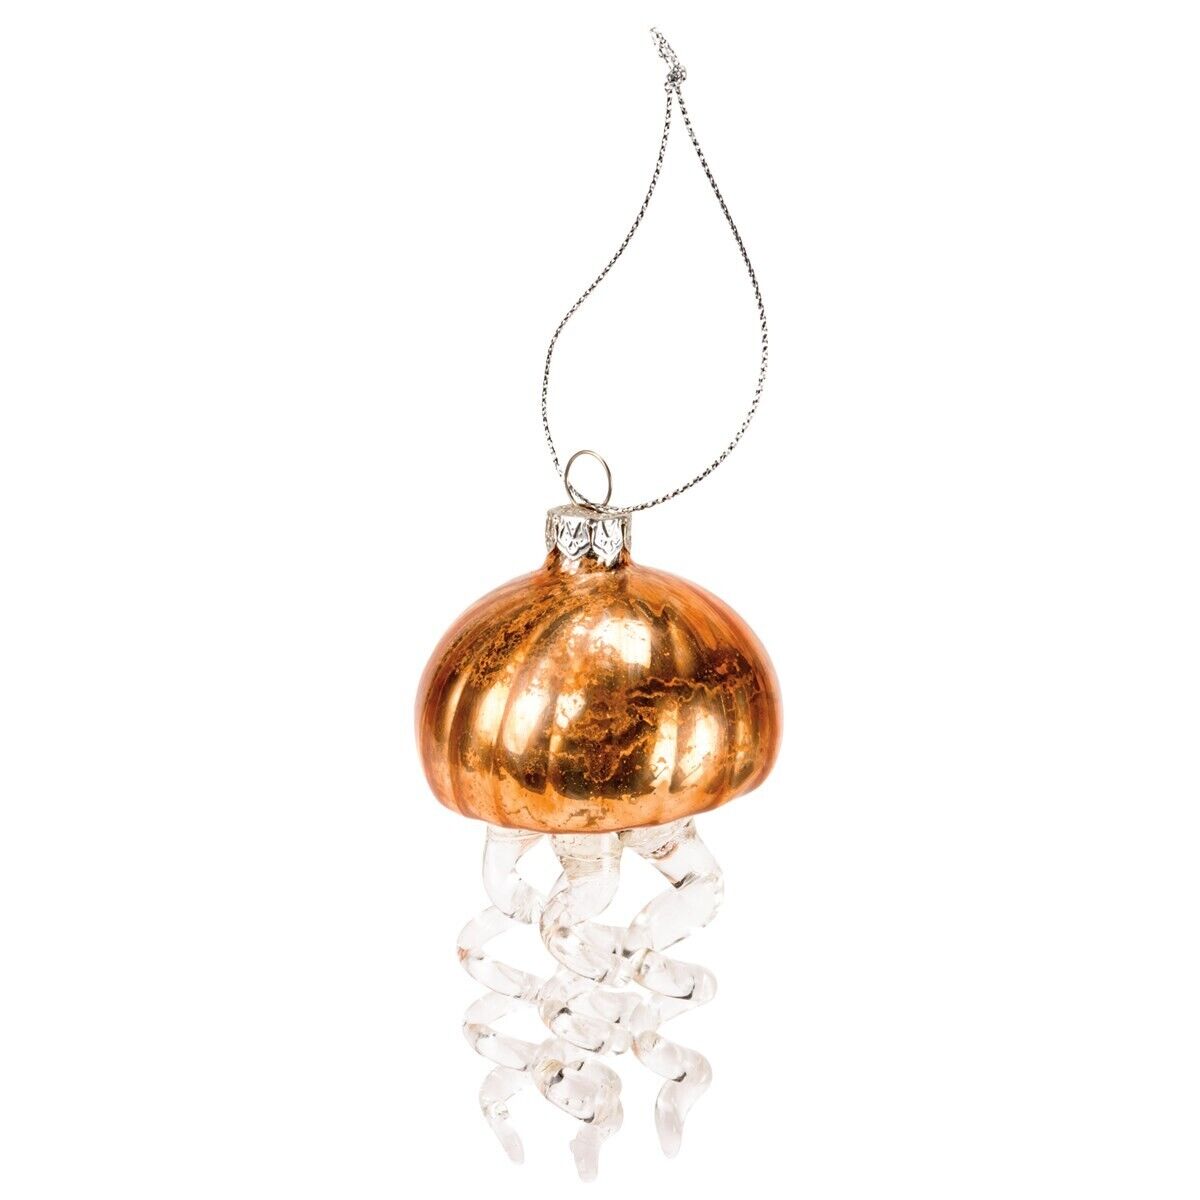 Metallic glass jellyfish ornament/gold/copper and clear /Christmas